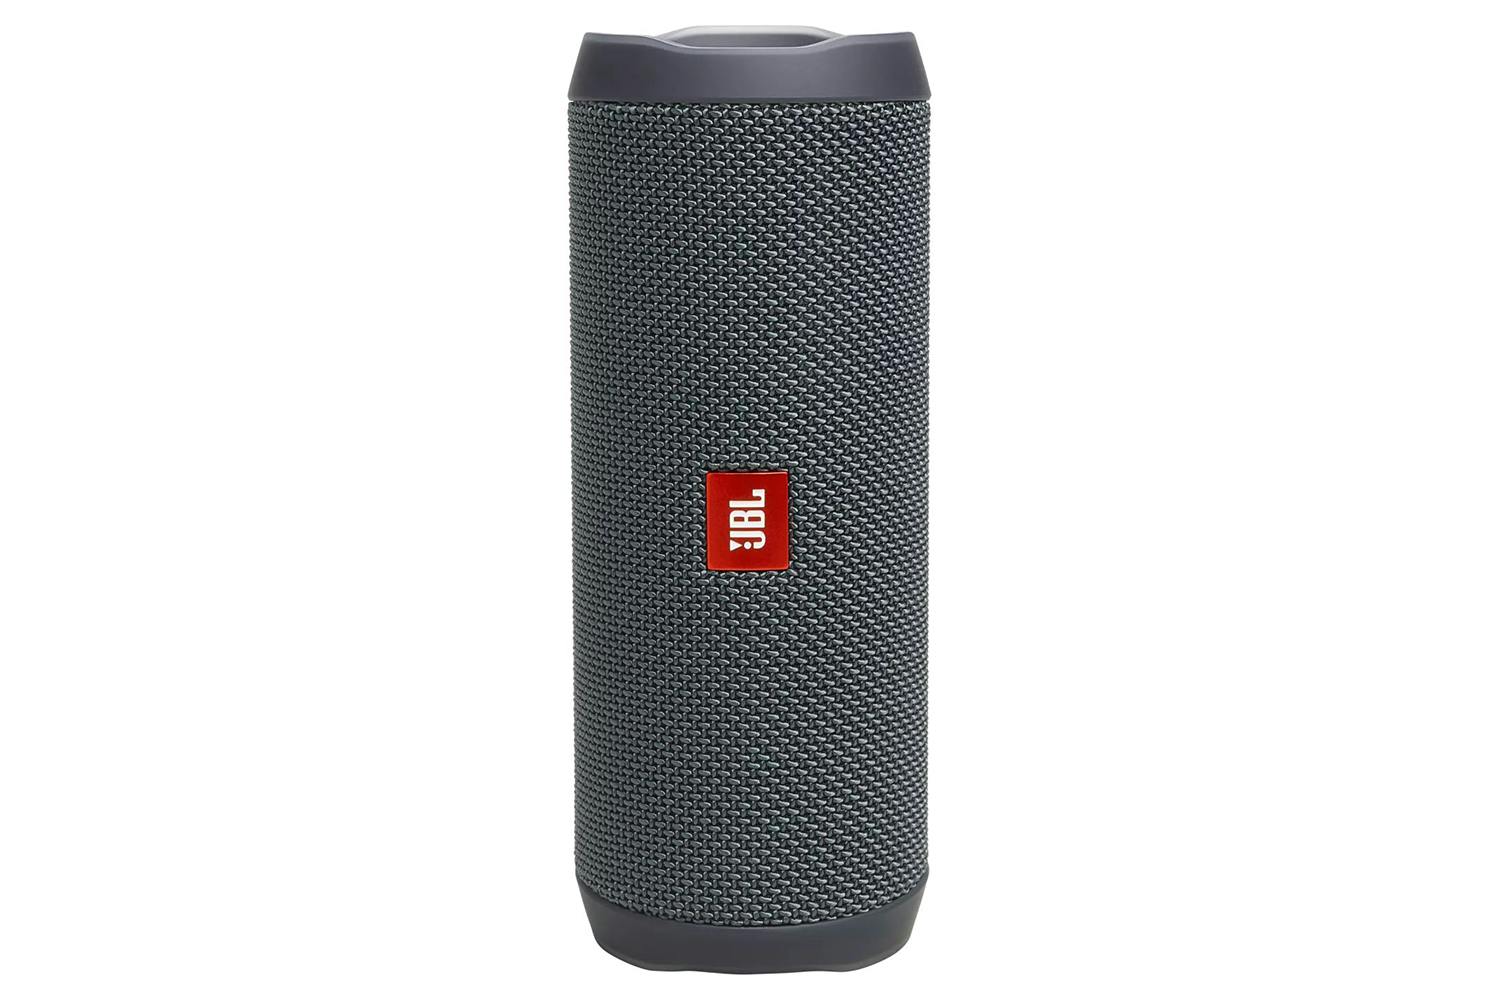 User manual JBL Flip Essential (English - 24 pages)